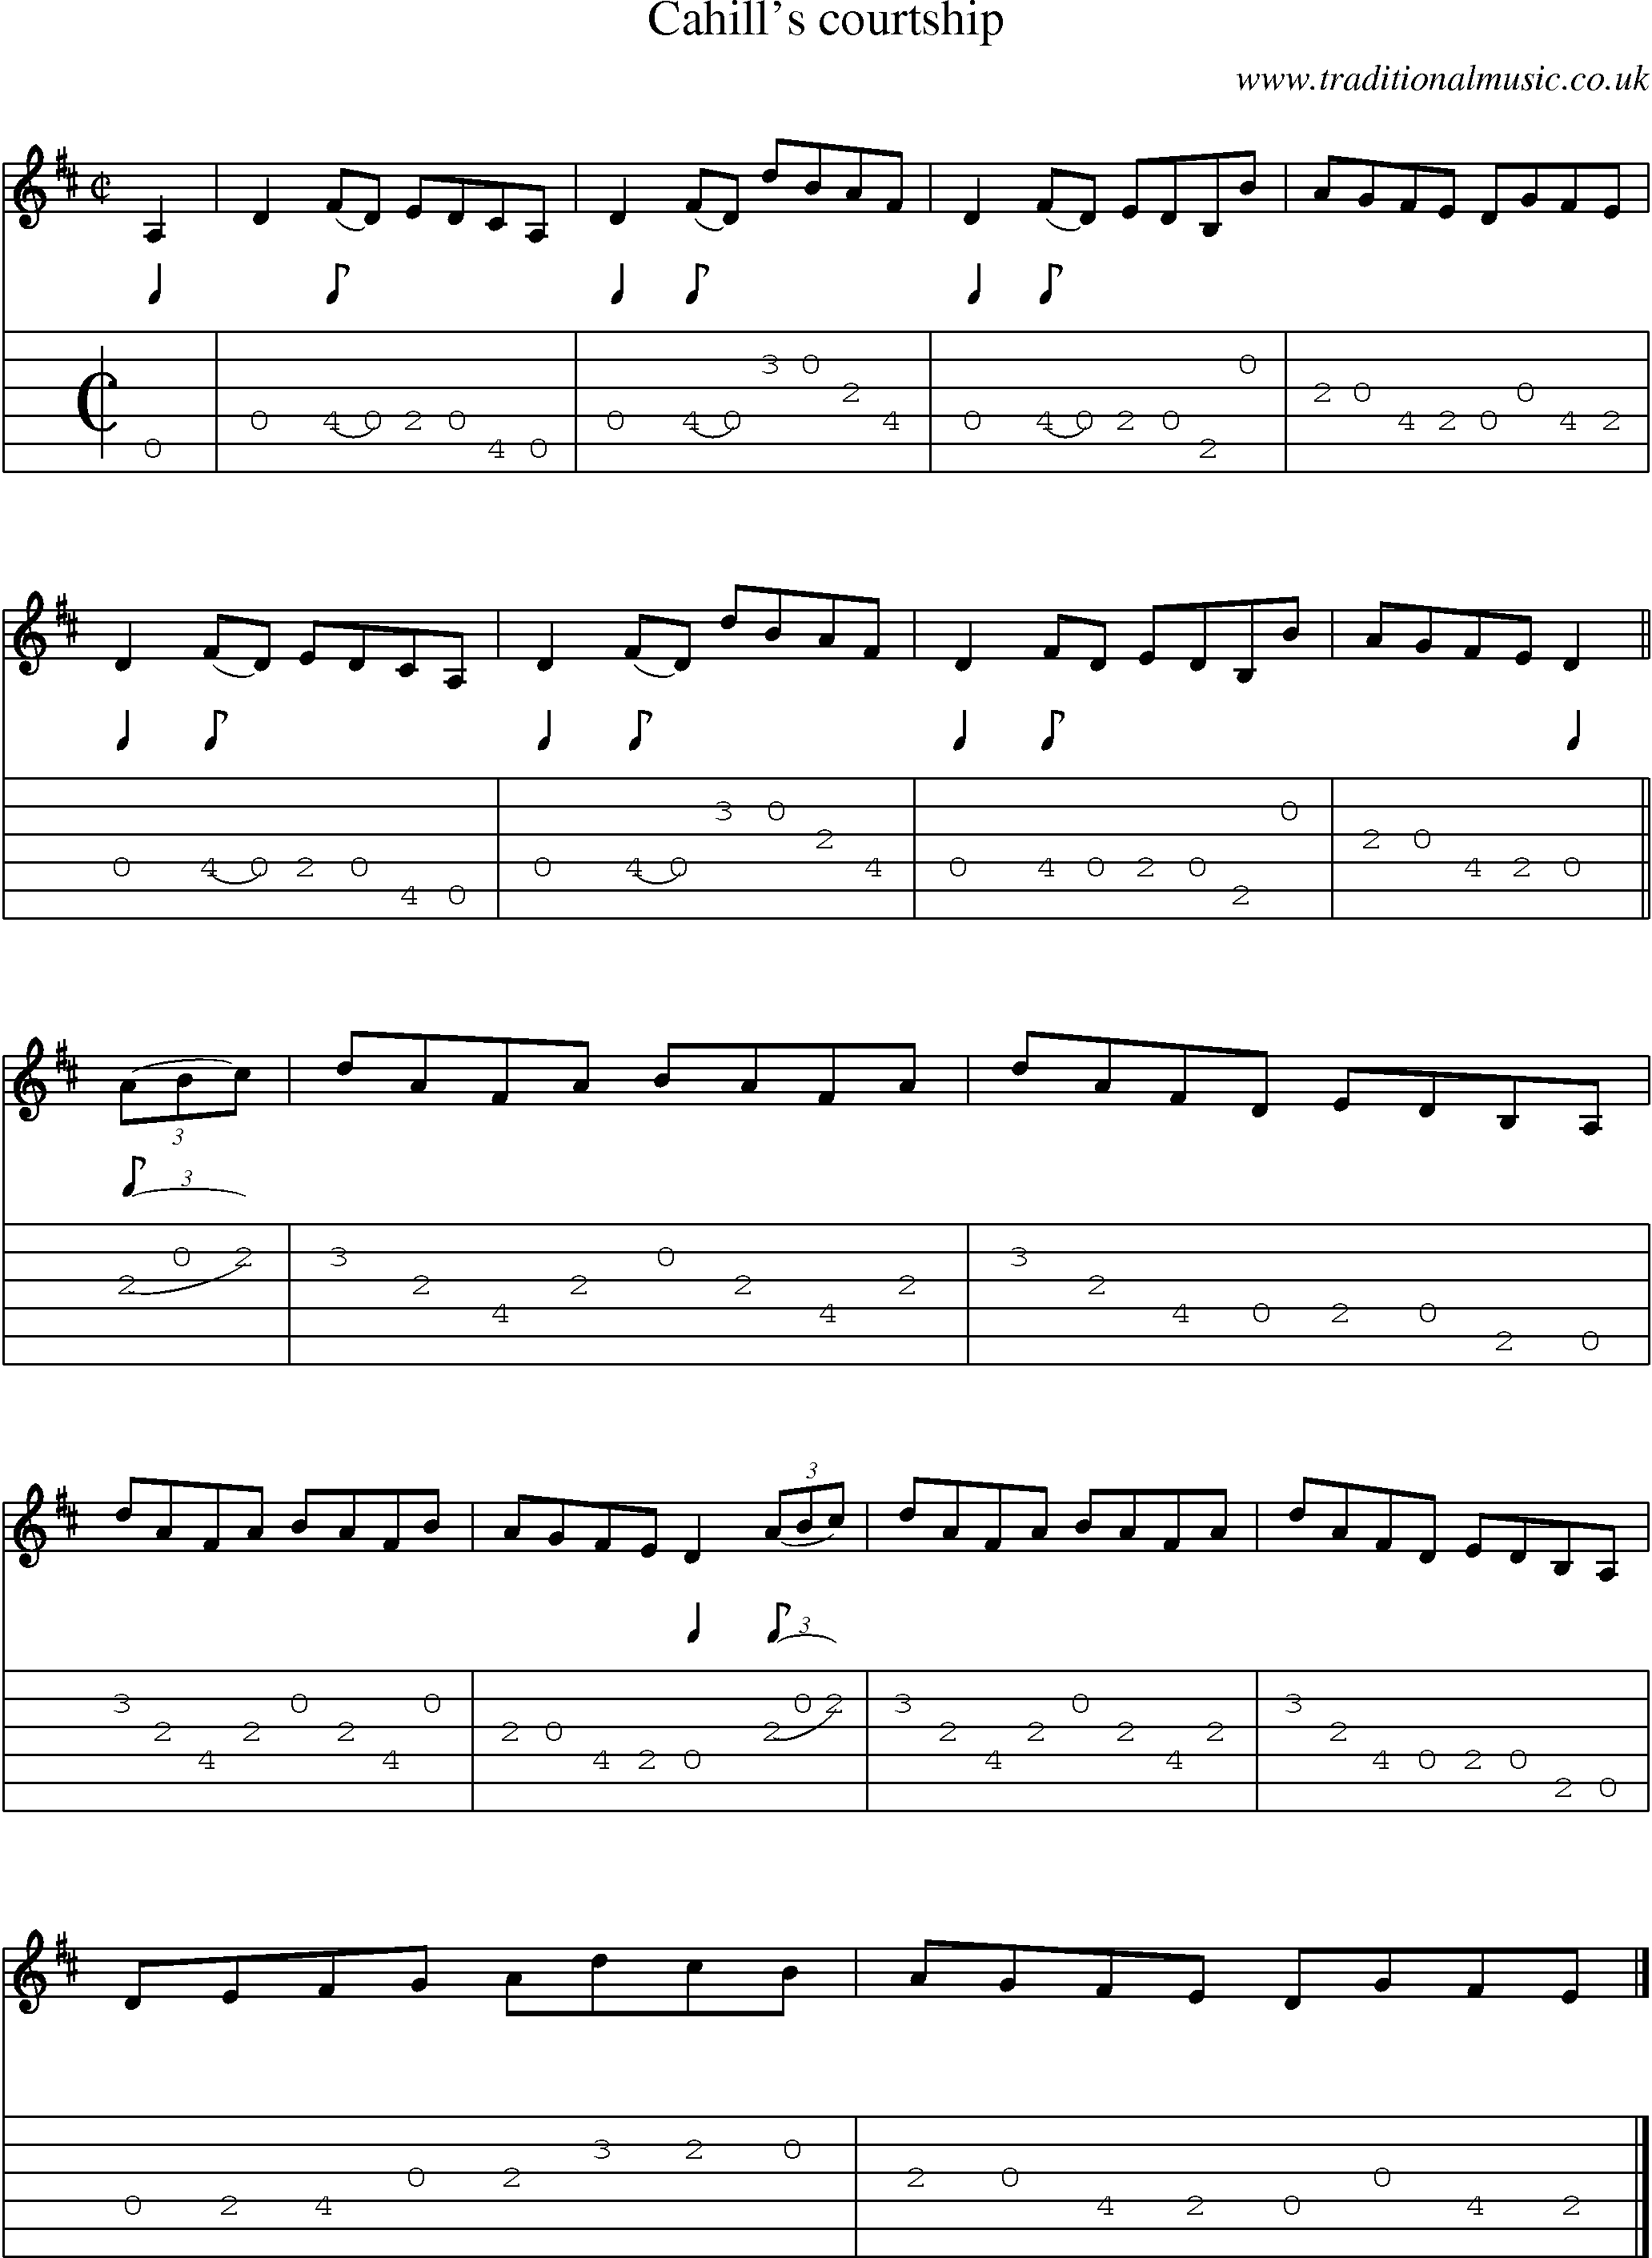 Music Score and Guitar Tabs for Cahills Courtship